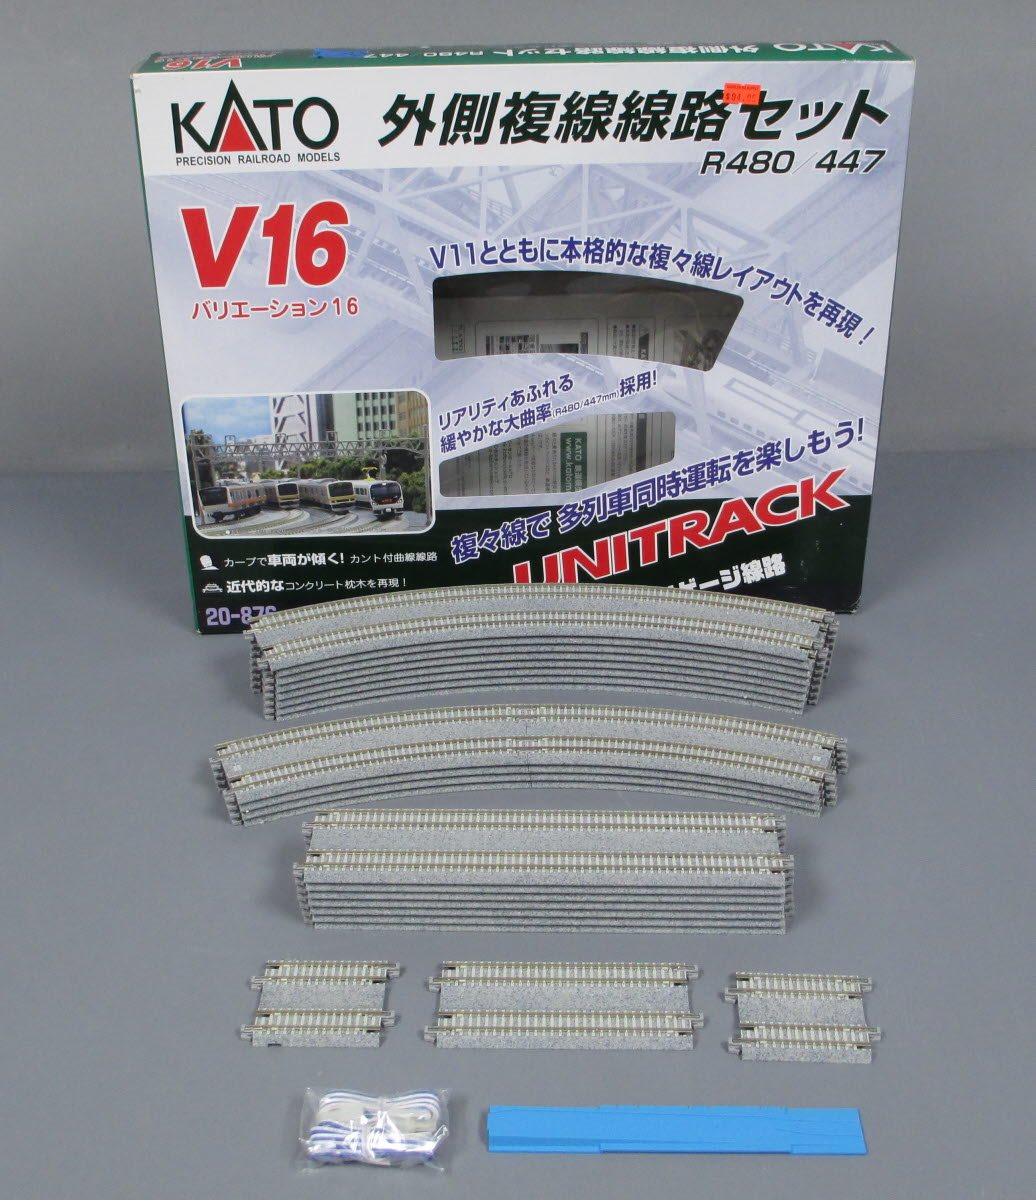 Kato 20-876 N V16 Double Track Outer Loop UniTrack